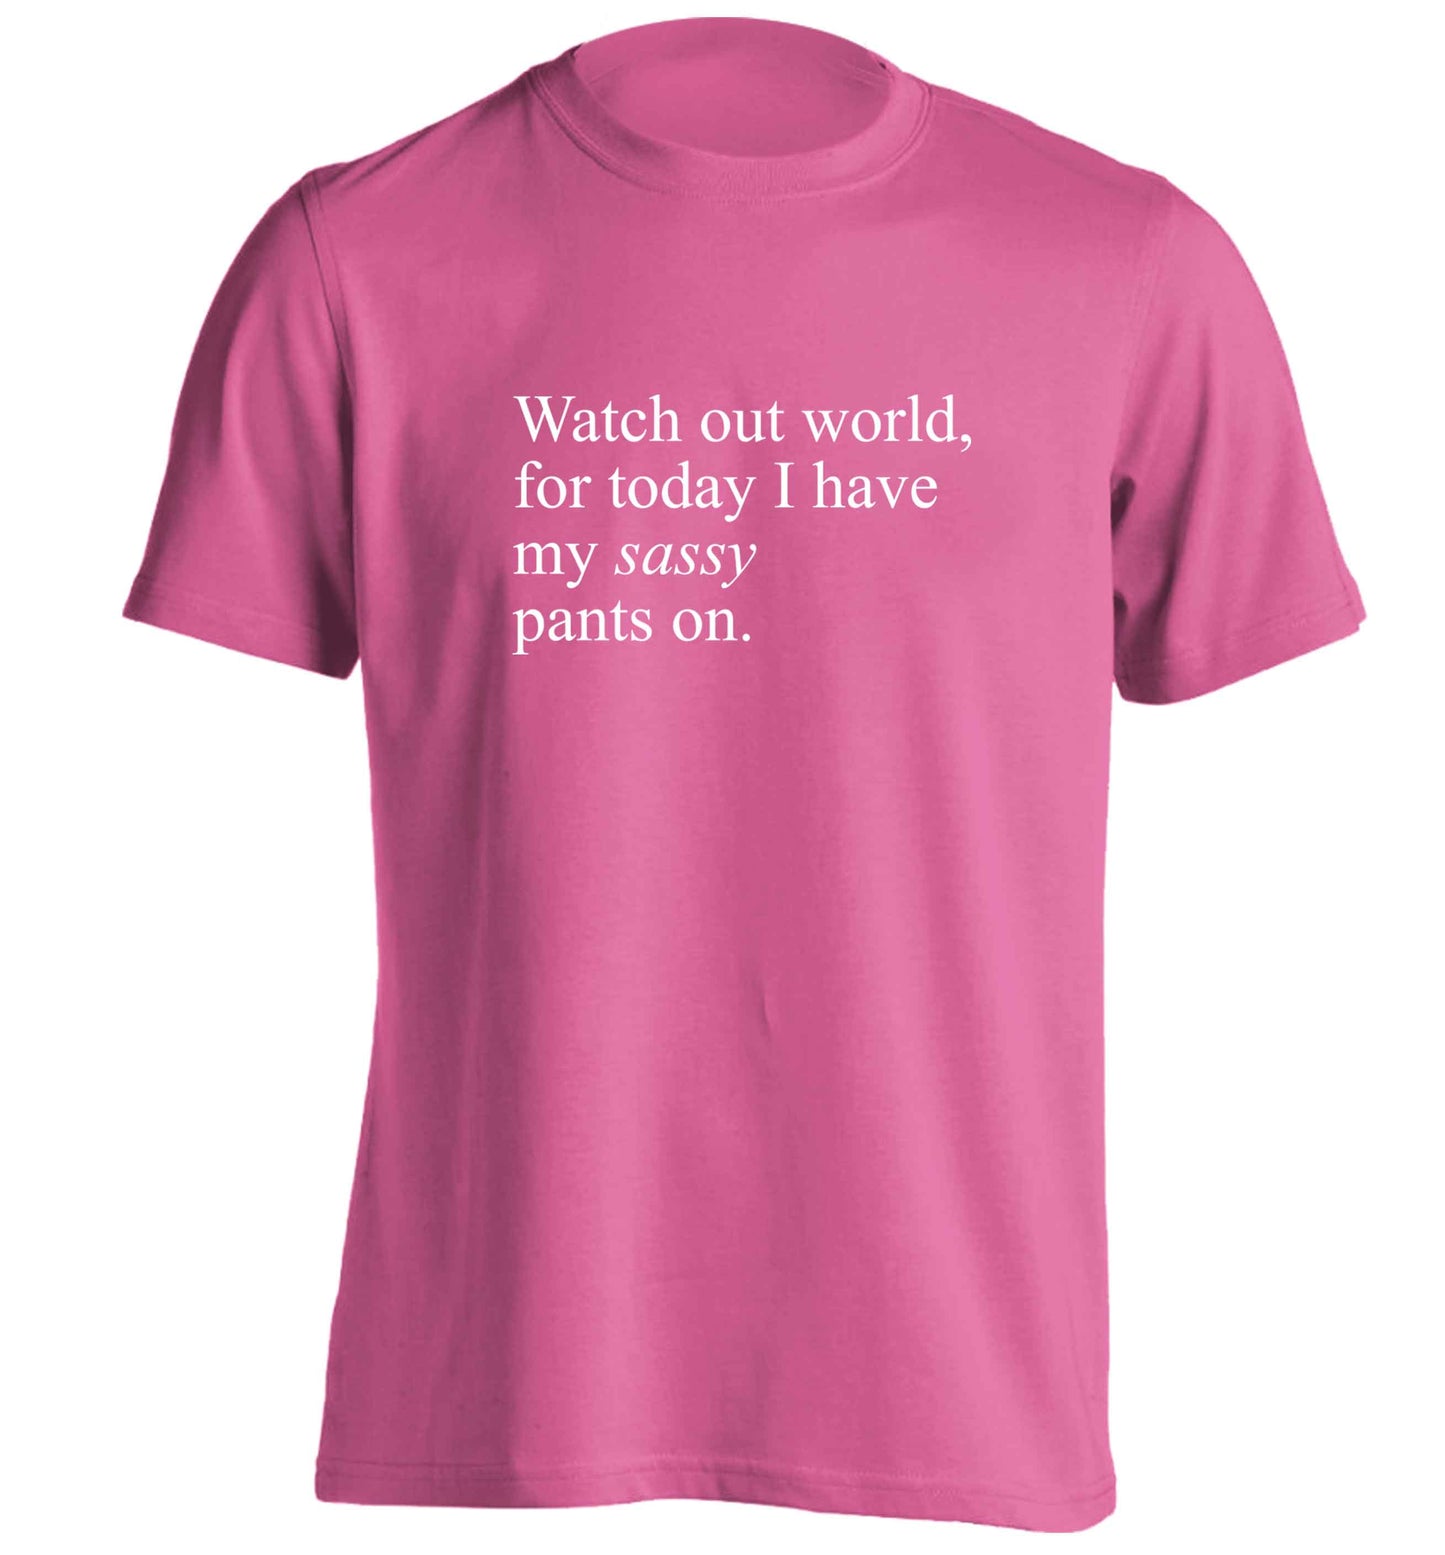 Watch out world for today I have my sassy pants on adults unisex pink Tshirt 2XL